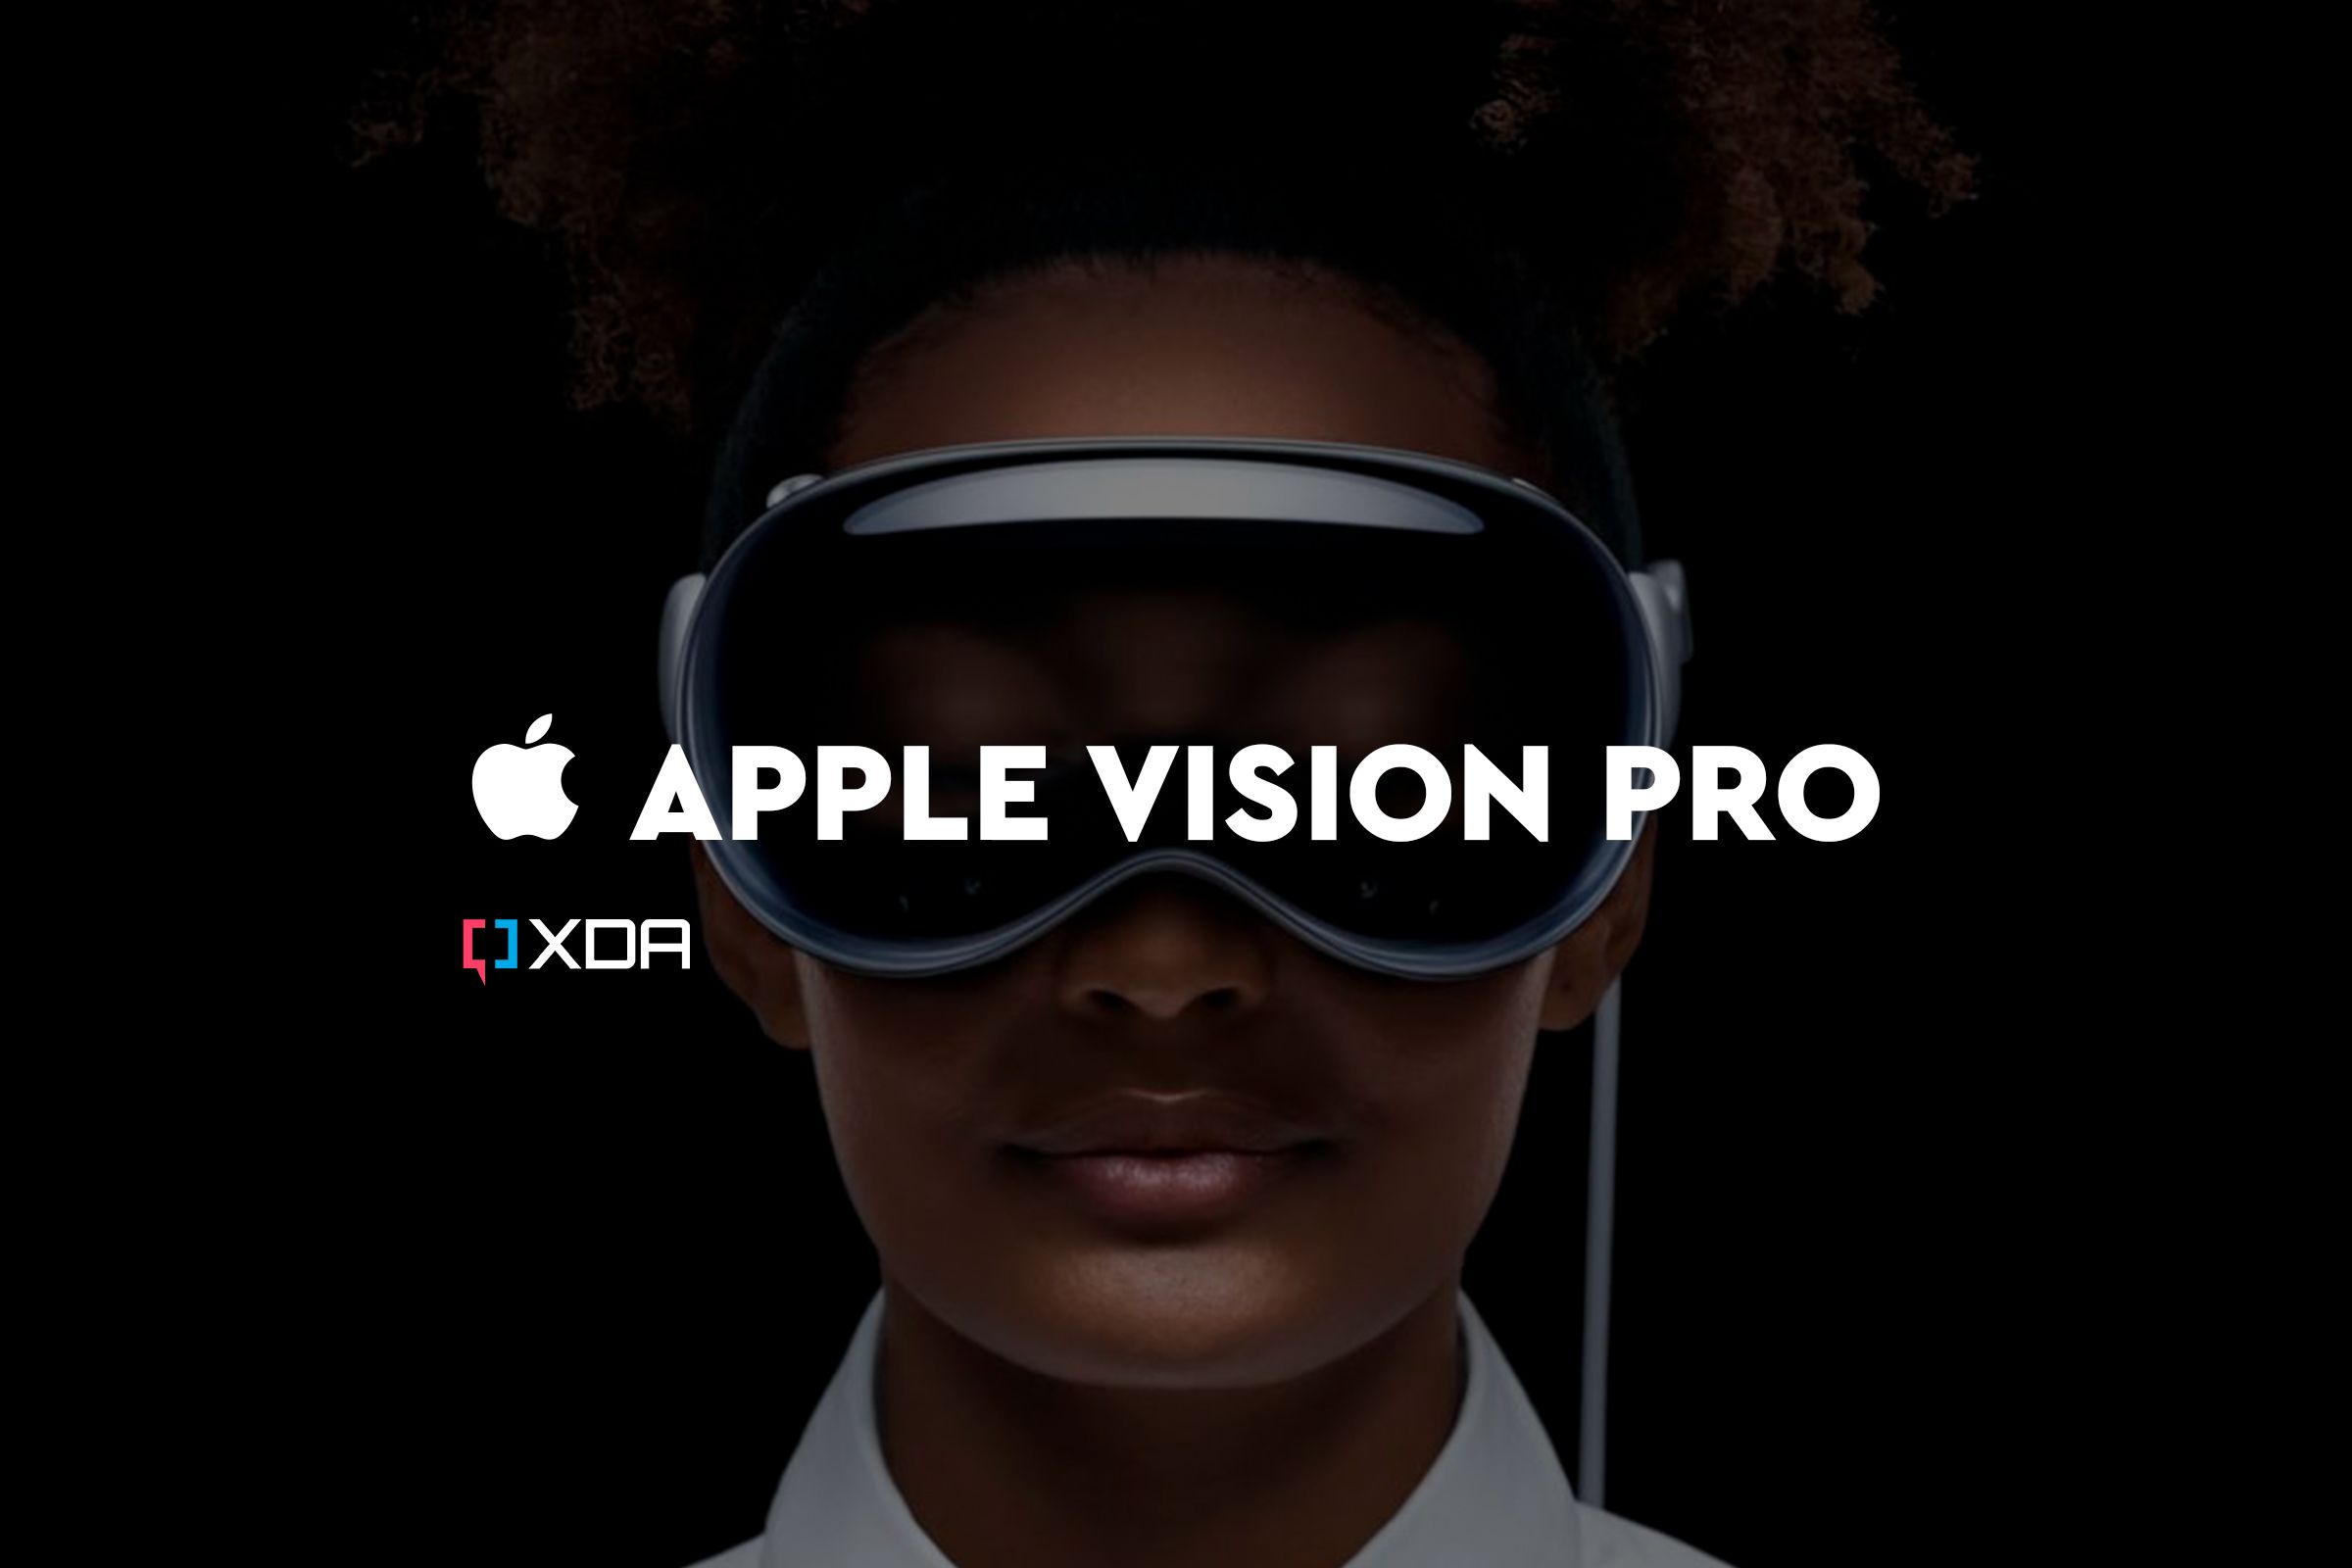 An image showing the text that reads Apple Vision Pro along with an XDA logo over an image of a person wearing the Vision Pro headset.